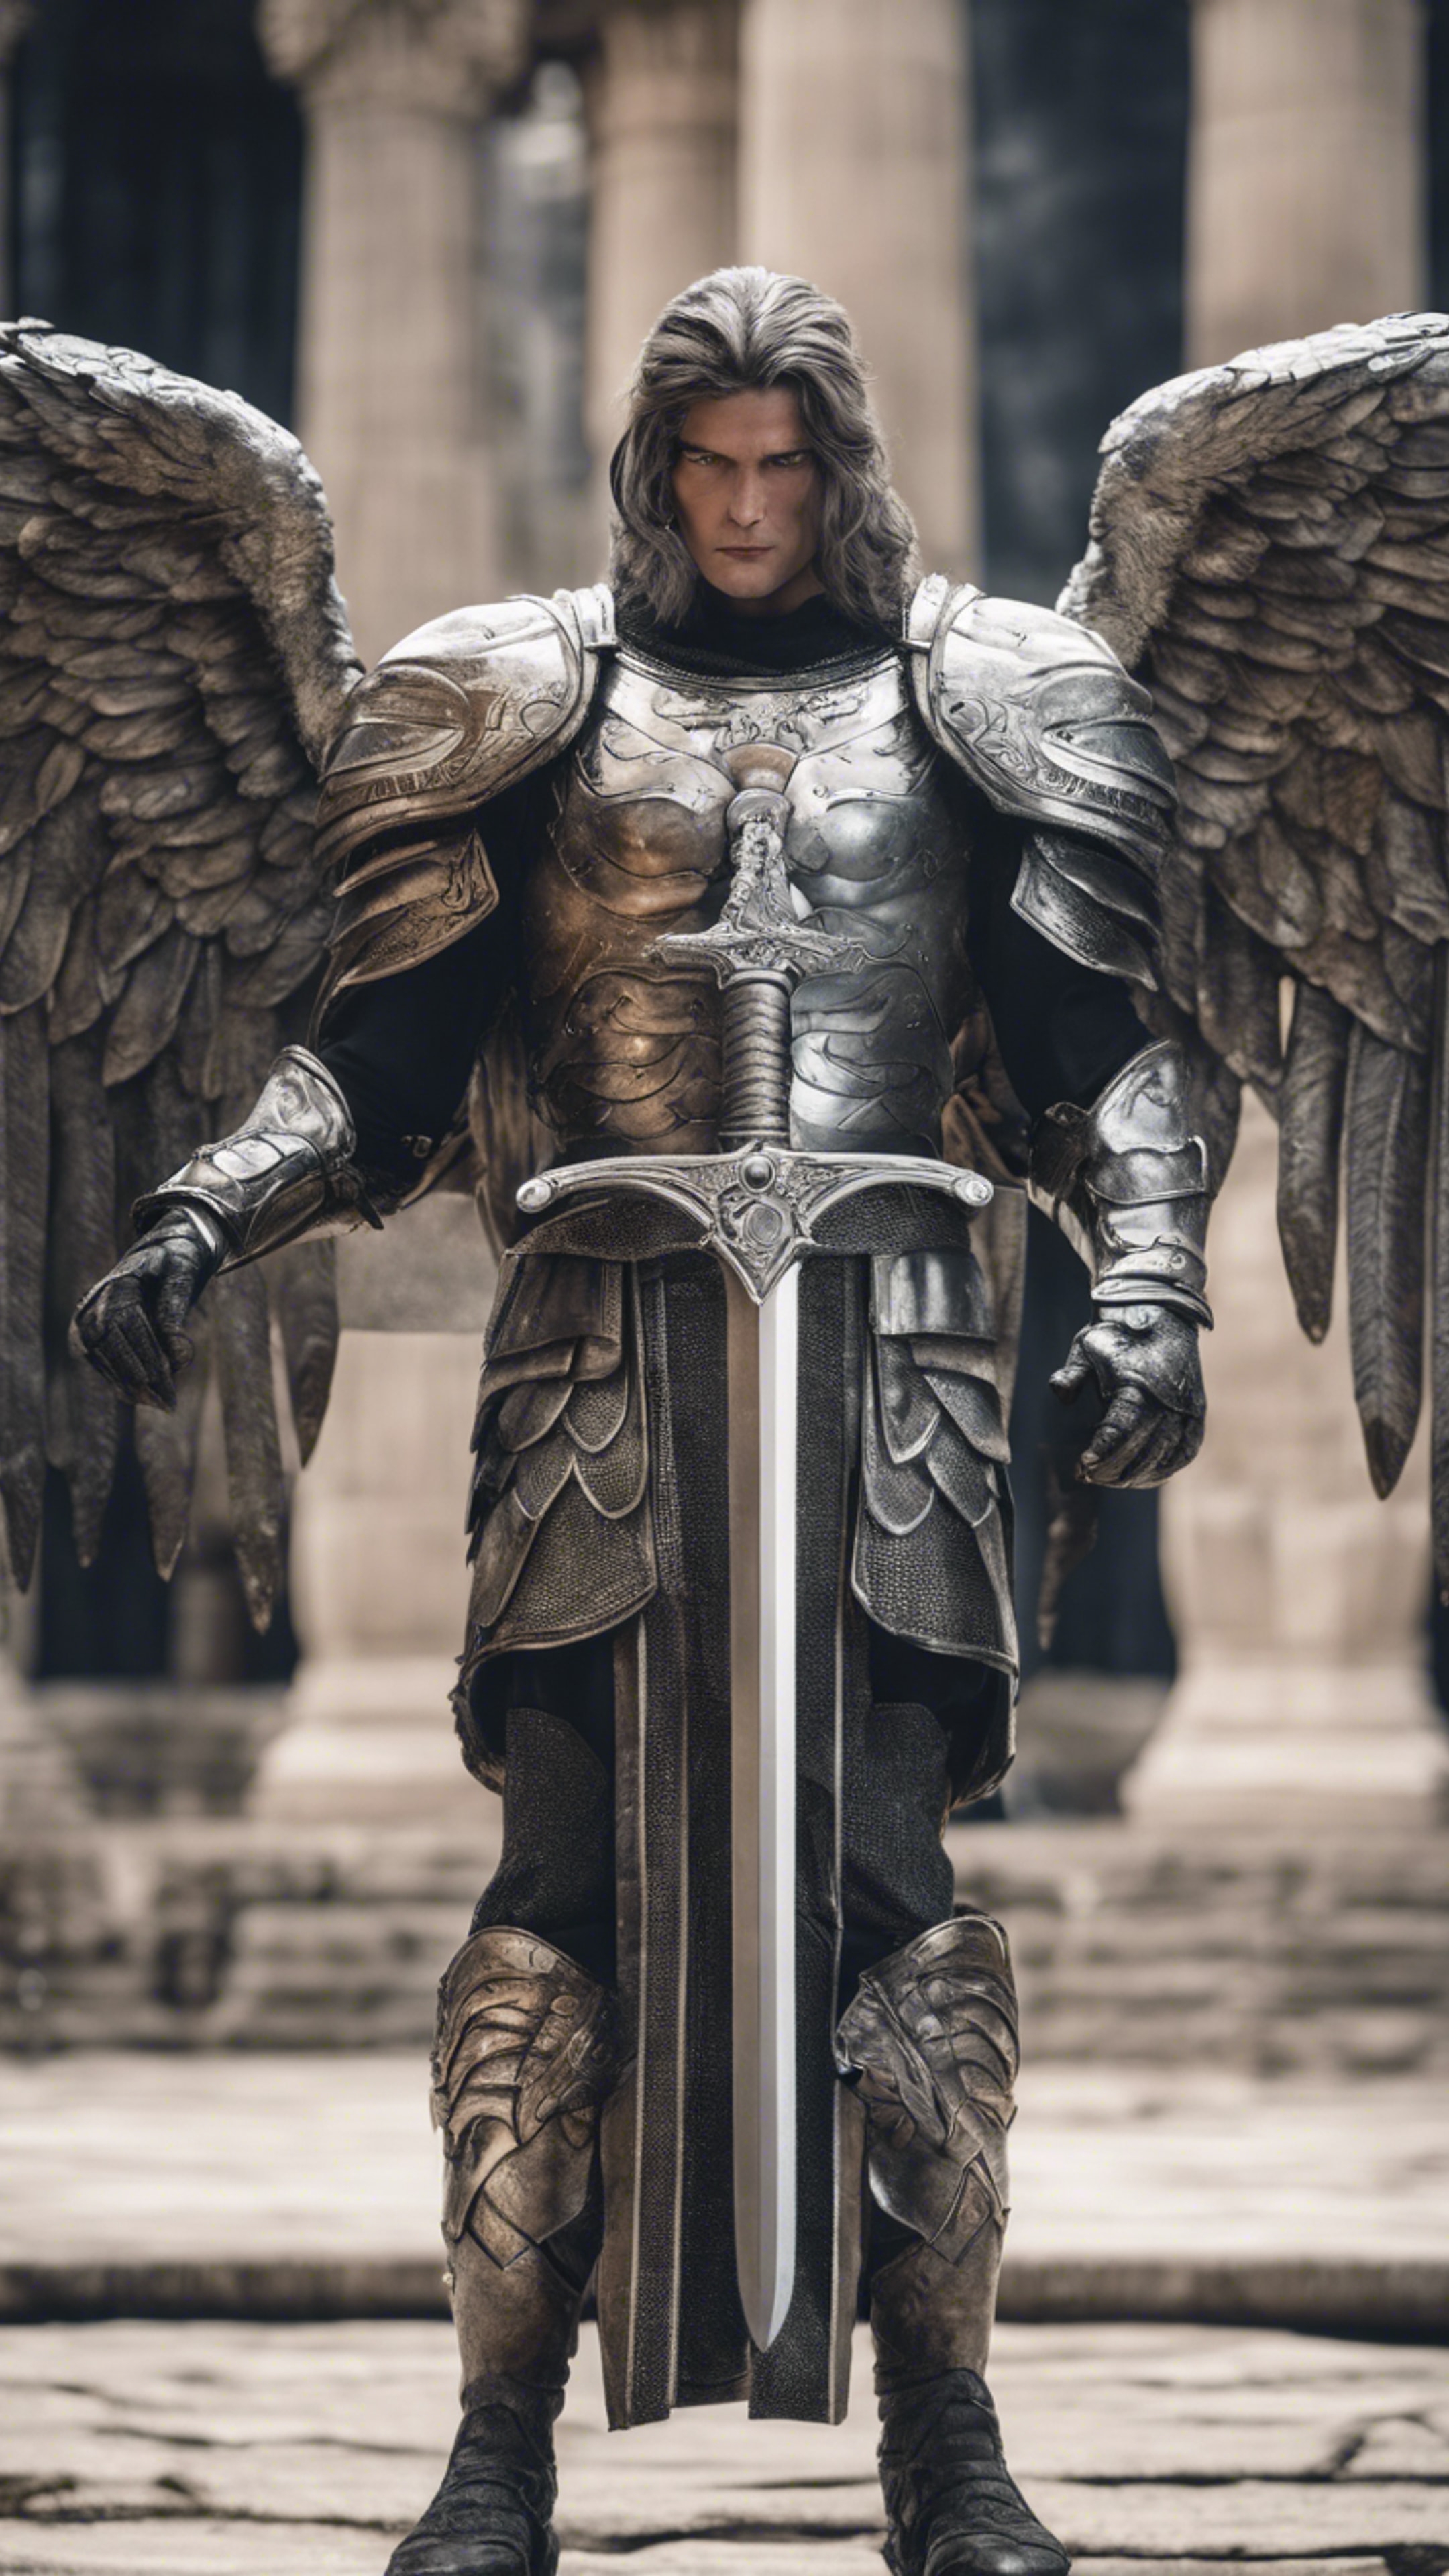 A strong archangel with a great silver sword in battle stance. Tapet[1419cc1cb5fd40c69a58]